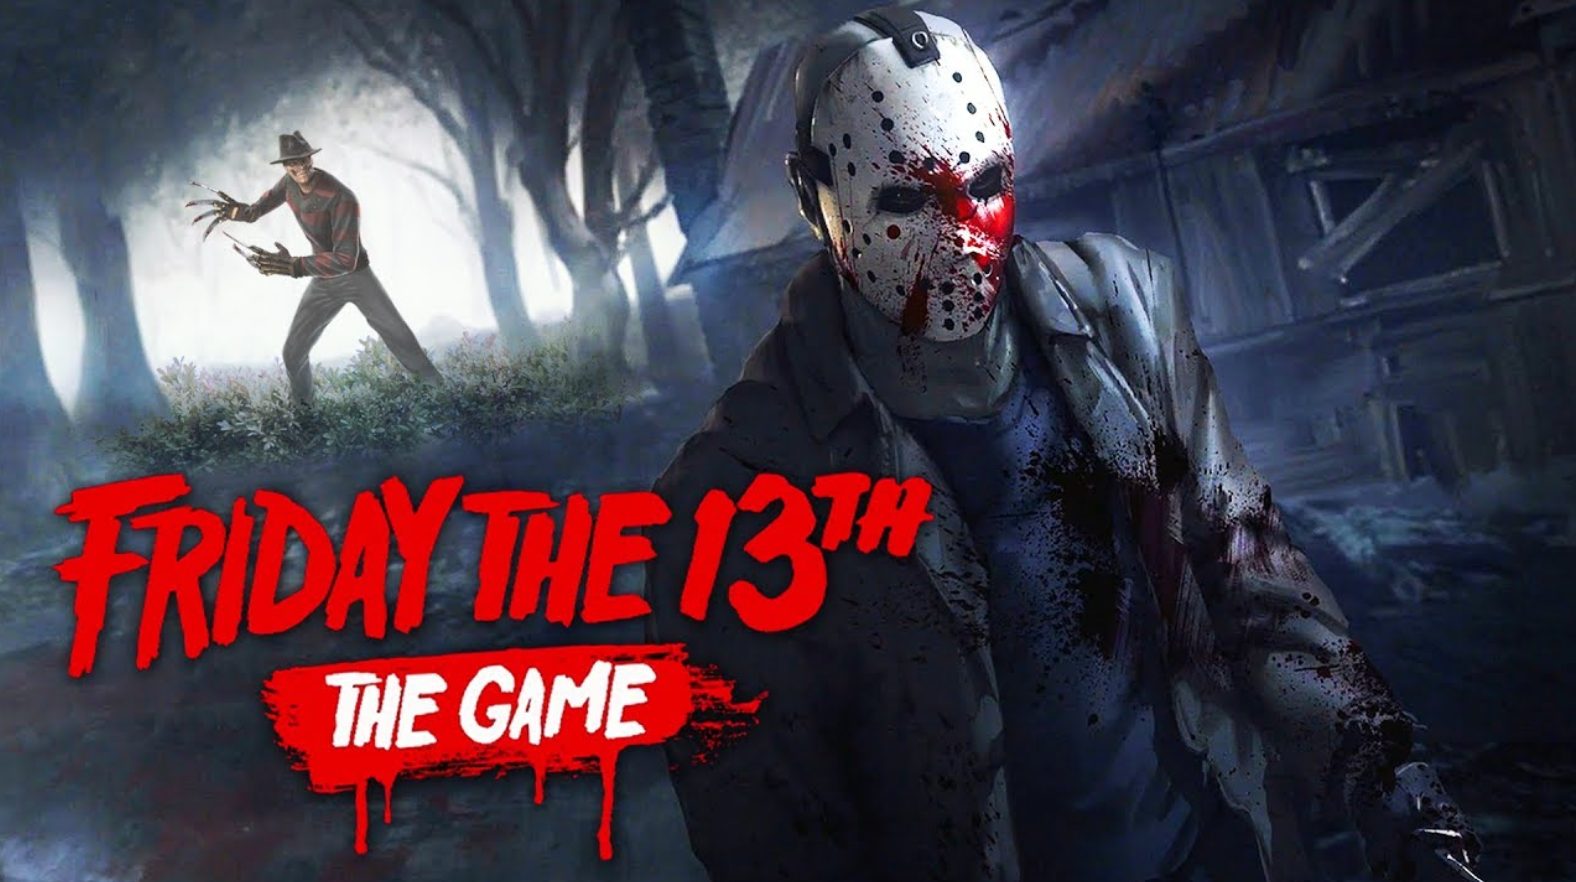 Friday the 13th The Game Download (Original Apk + MOD APK + OBB) For Android